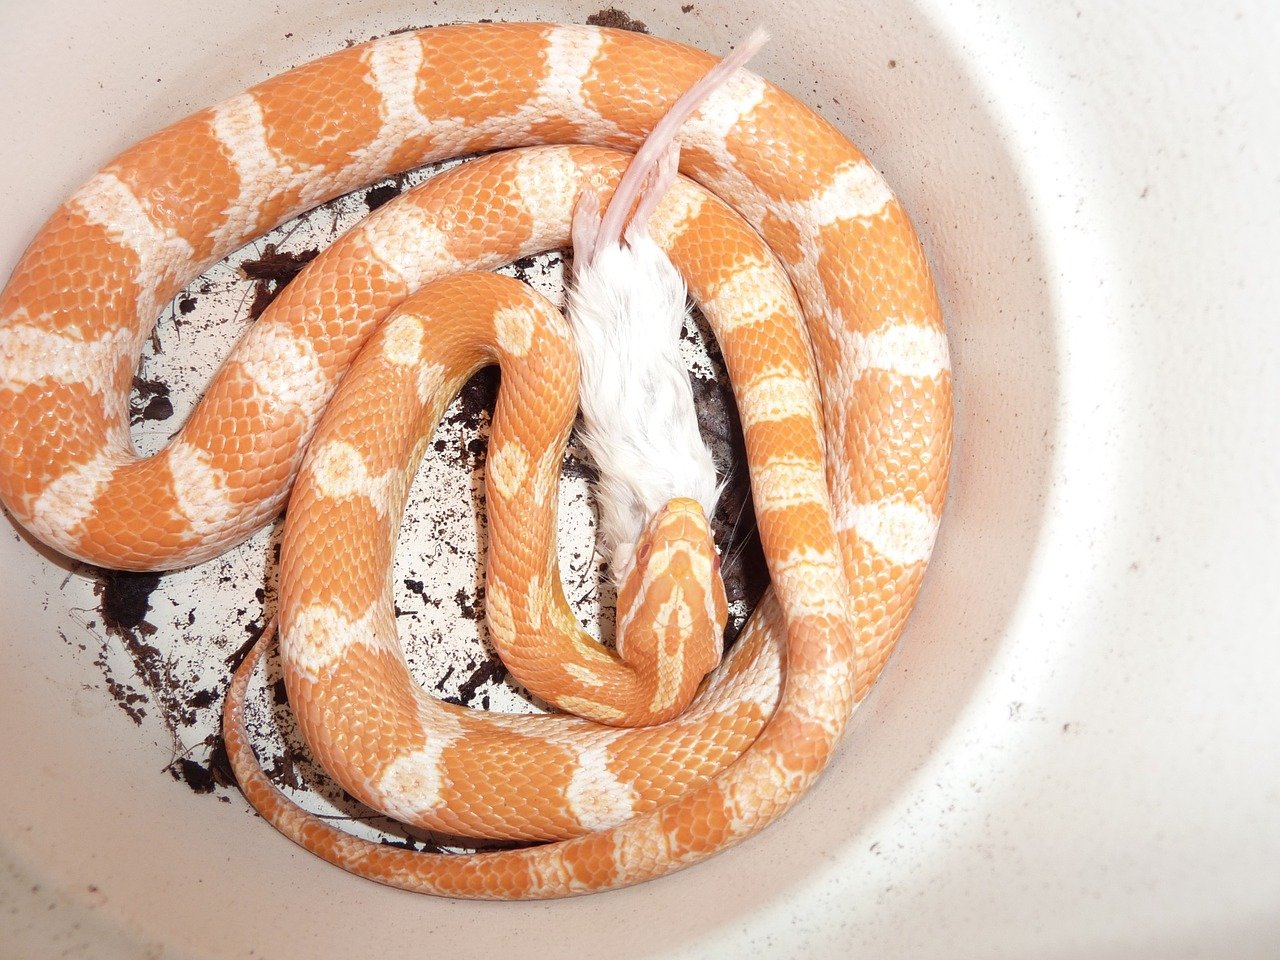 Corn snake eating a mouse